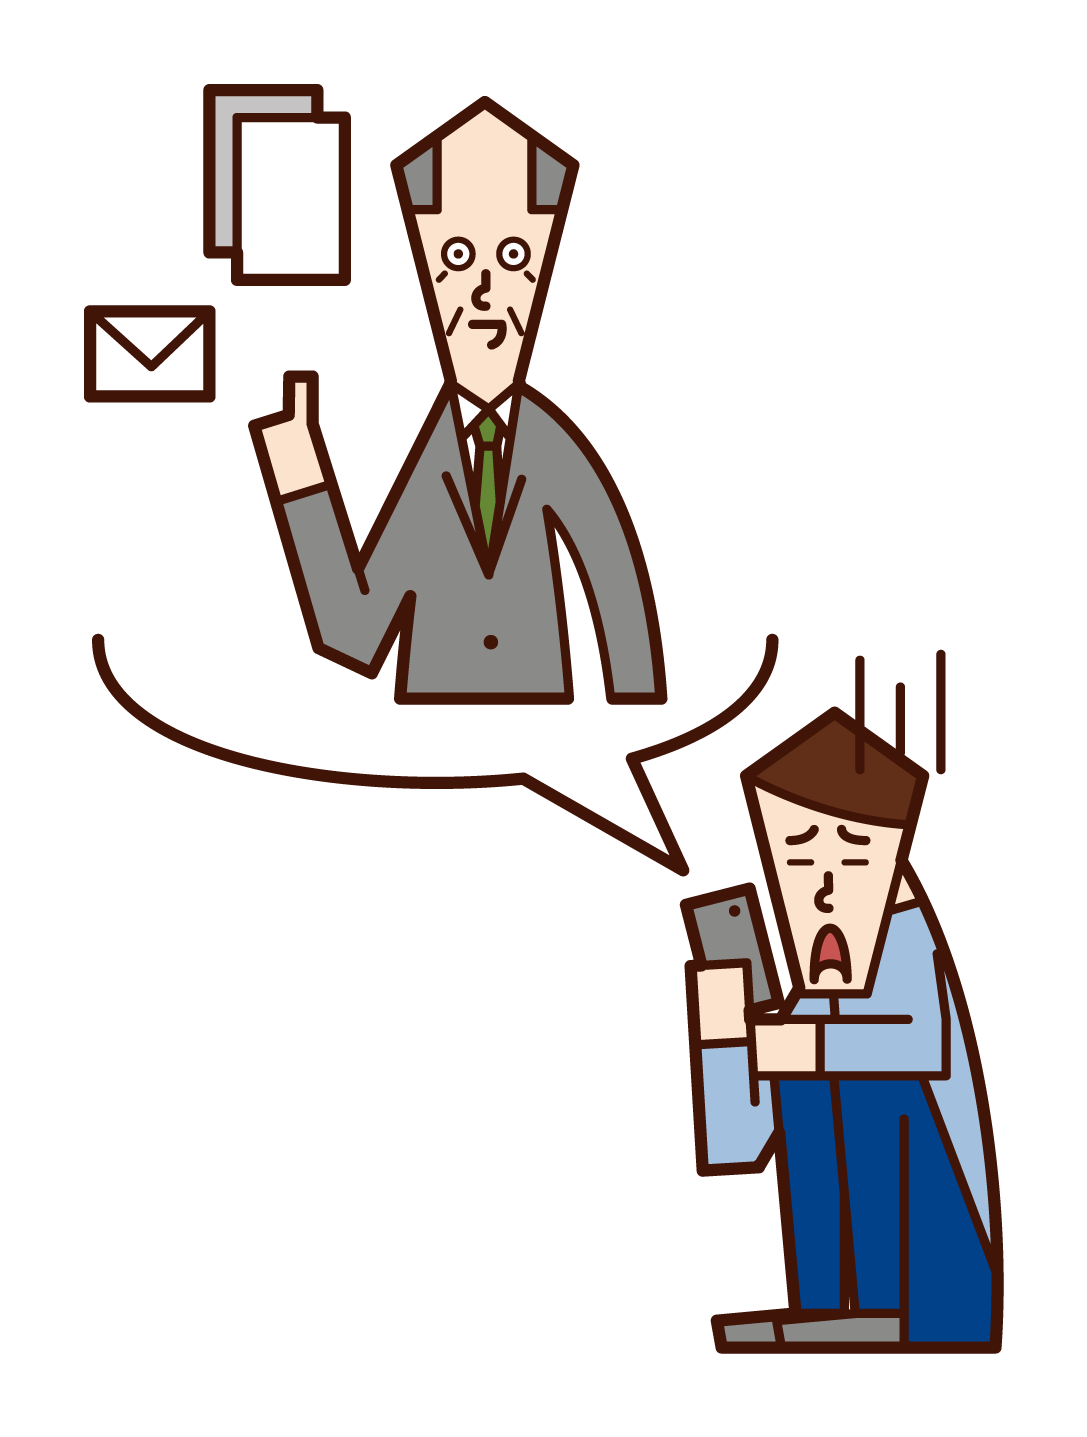 Illustration of a man who suffers from contact from his boss